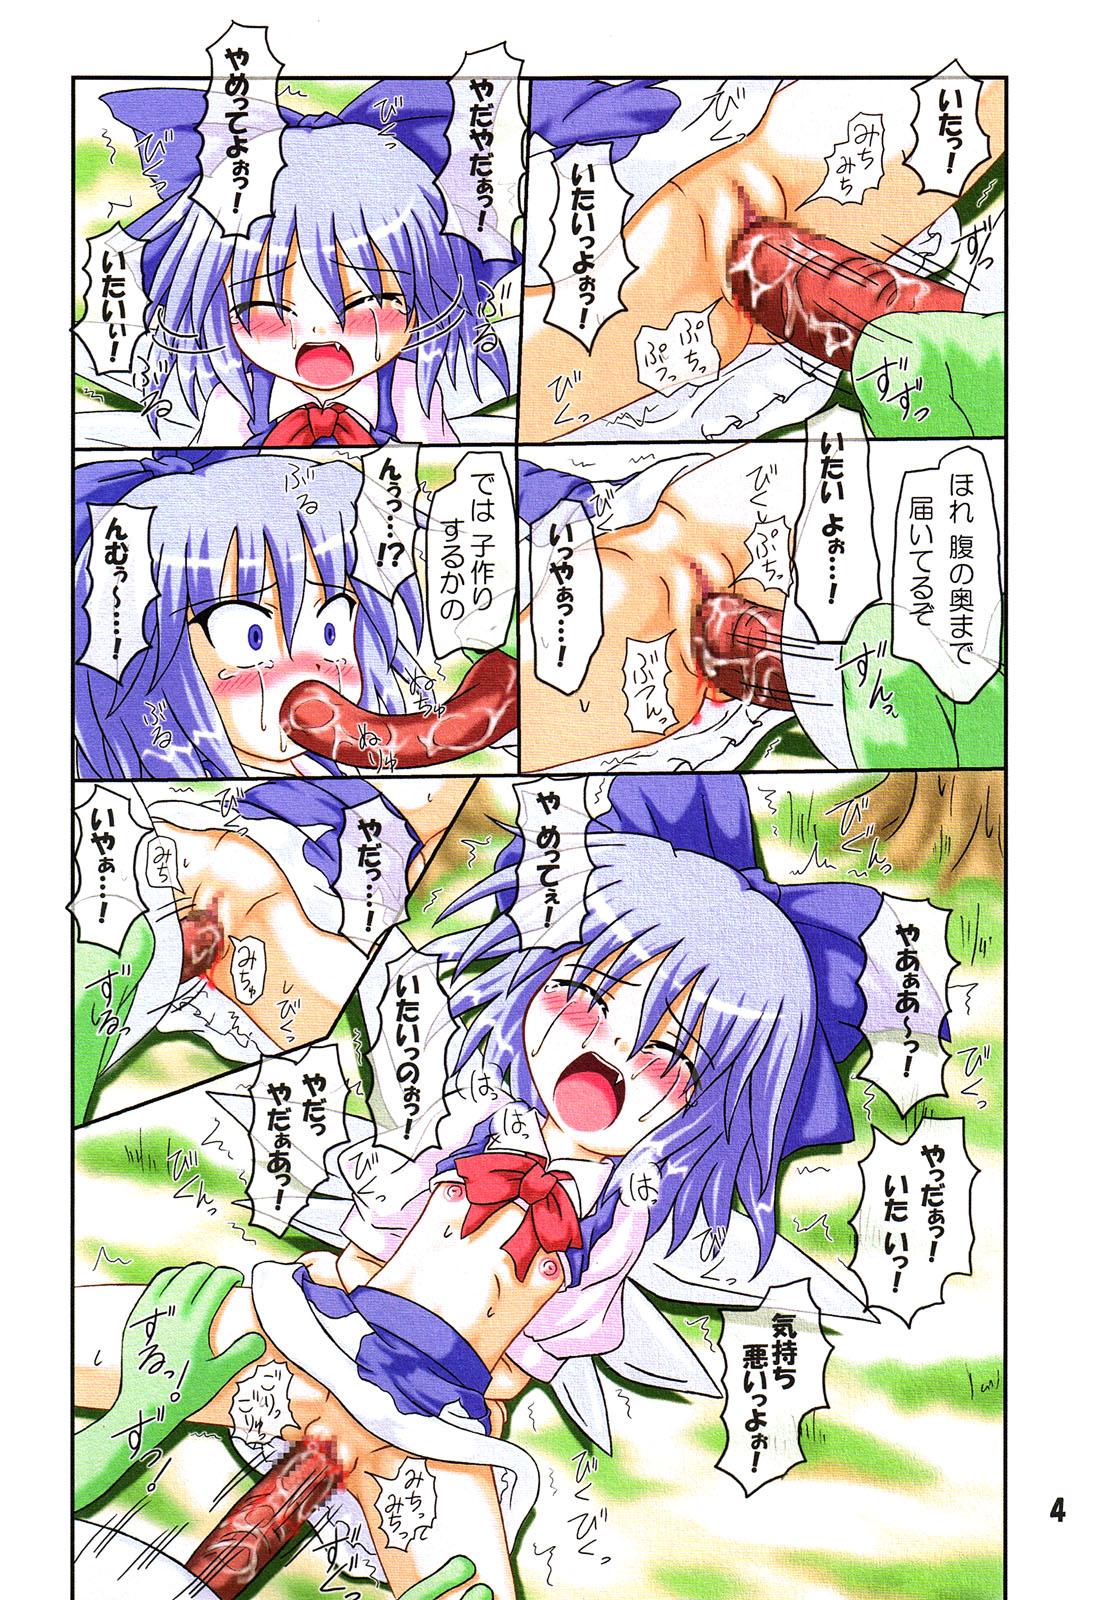 Flogging Rollin 22 - Touhou project Ex Girlfriend - Page 3